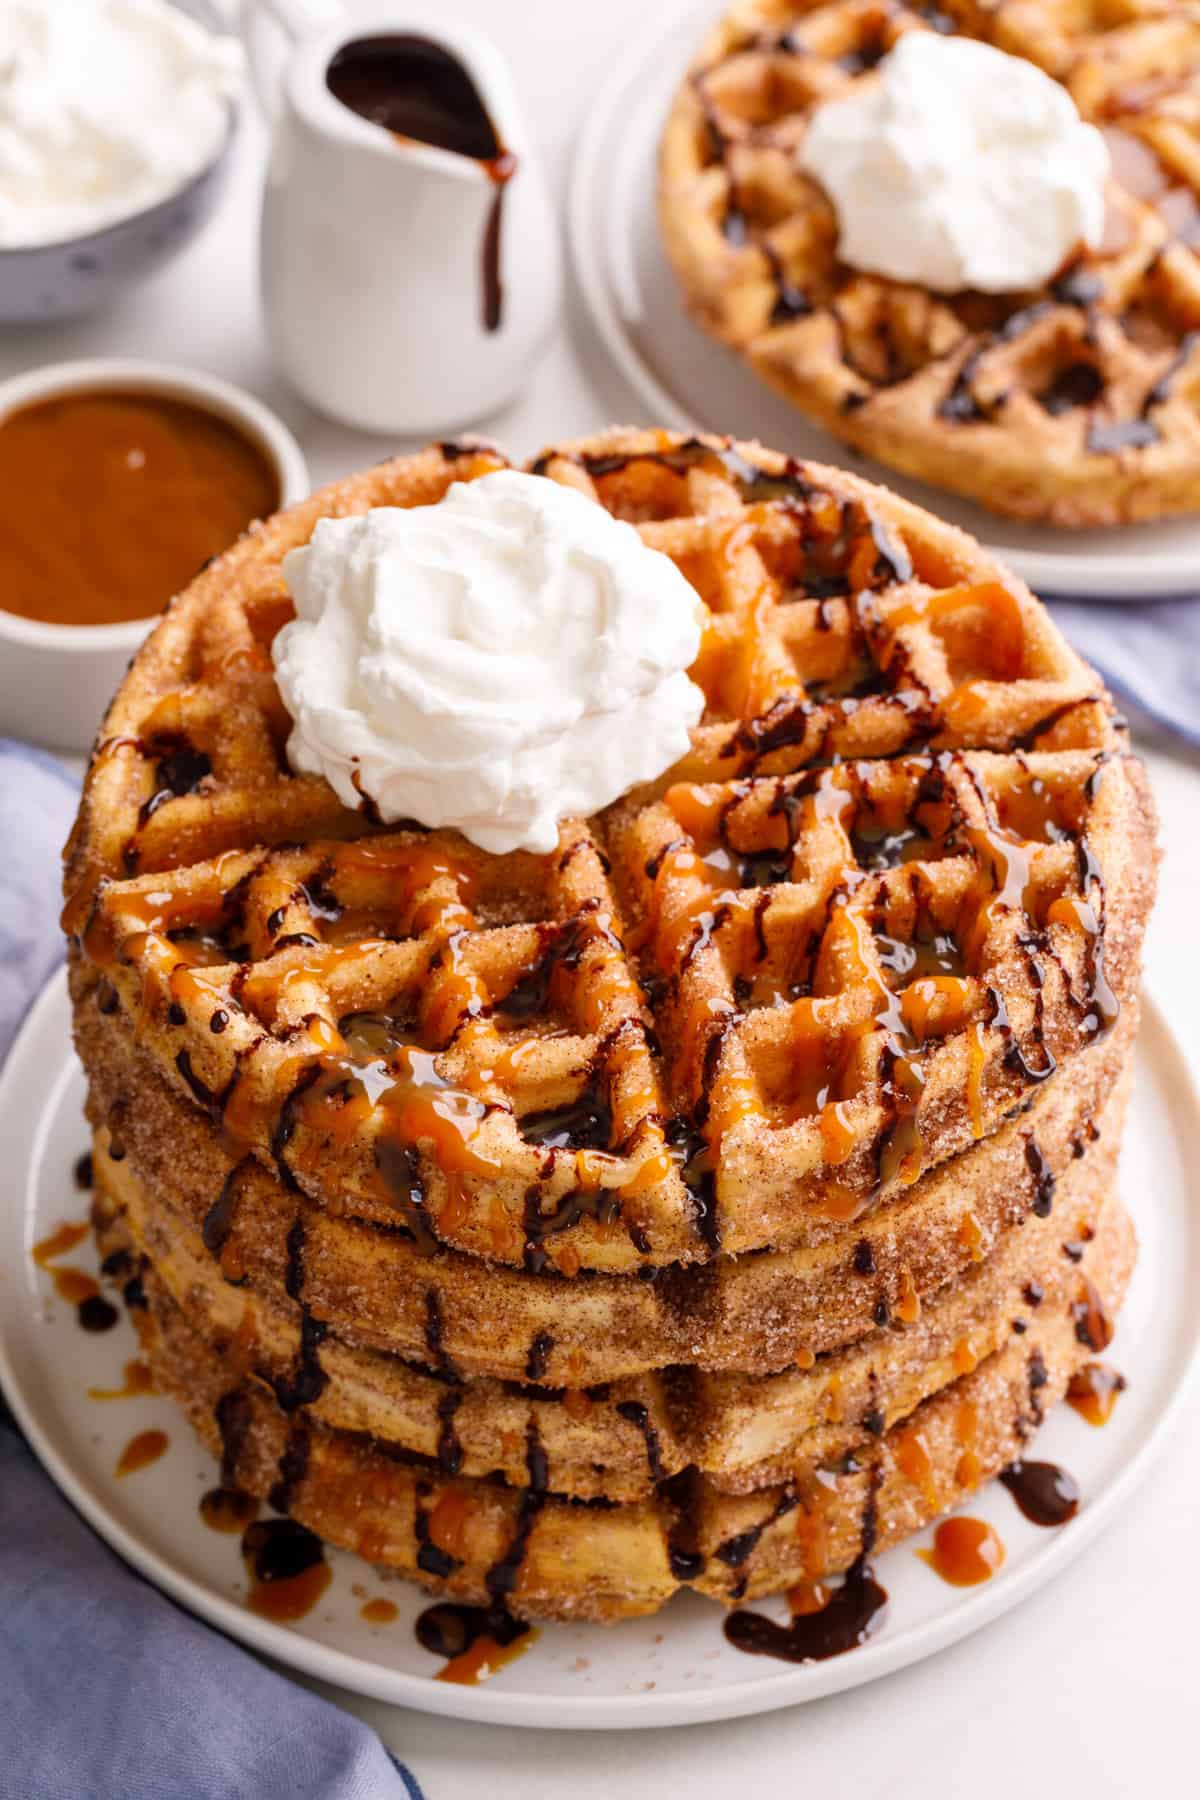 stack of four churro waffles on a plate topped with chocolate and caramel sauce and whipped cream